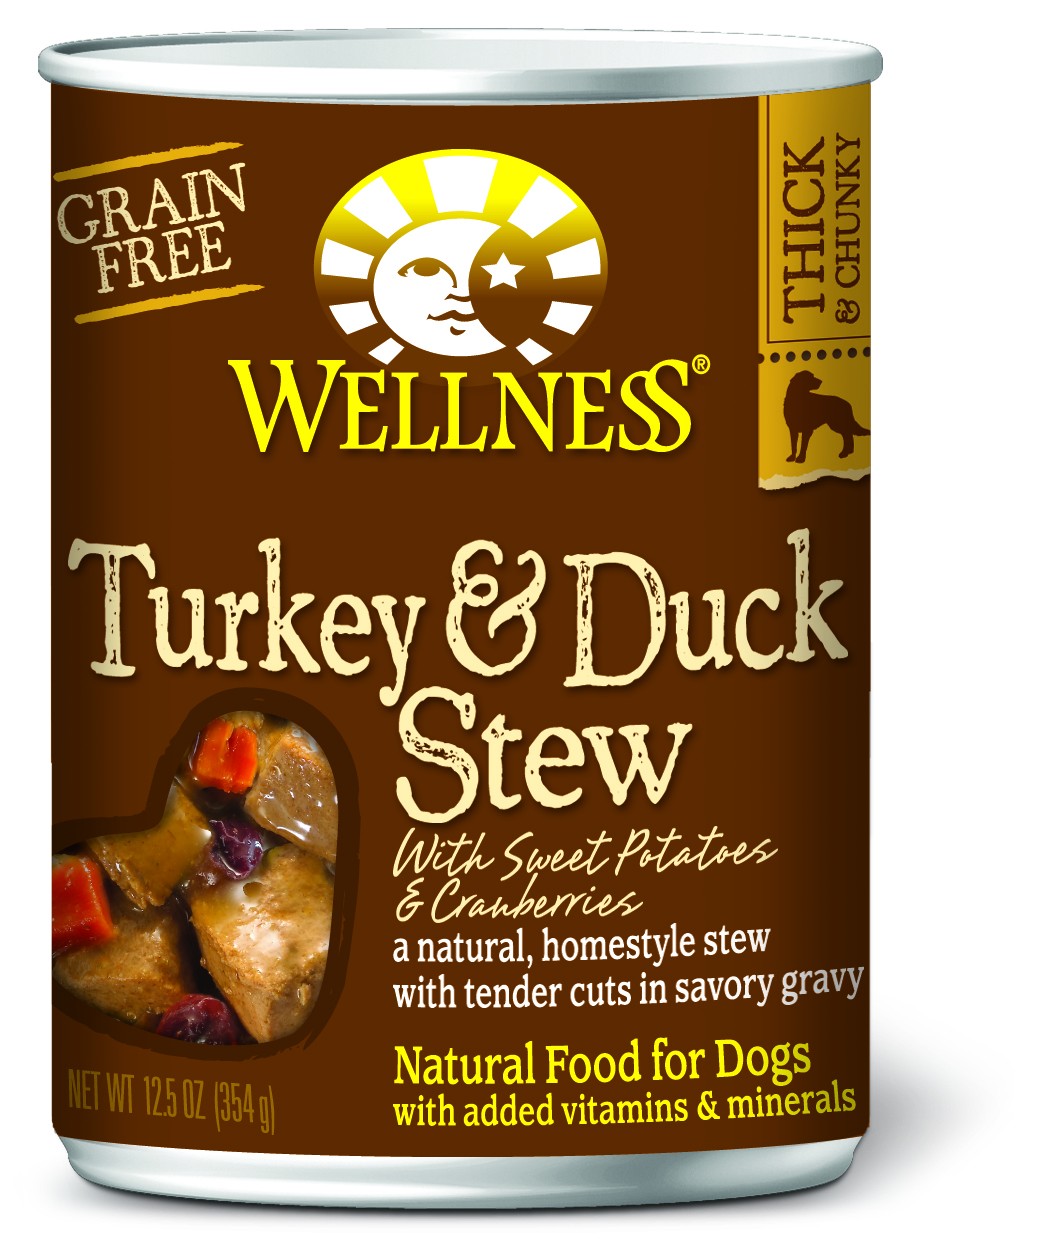 Wellness Homestyle Stew - Grain Free Turkey & Duck Stew with Sweet Potatoes & Cranberries Canned Dog Food